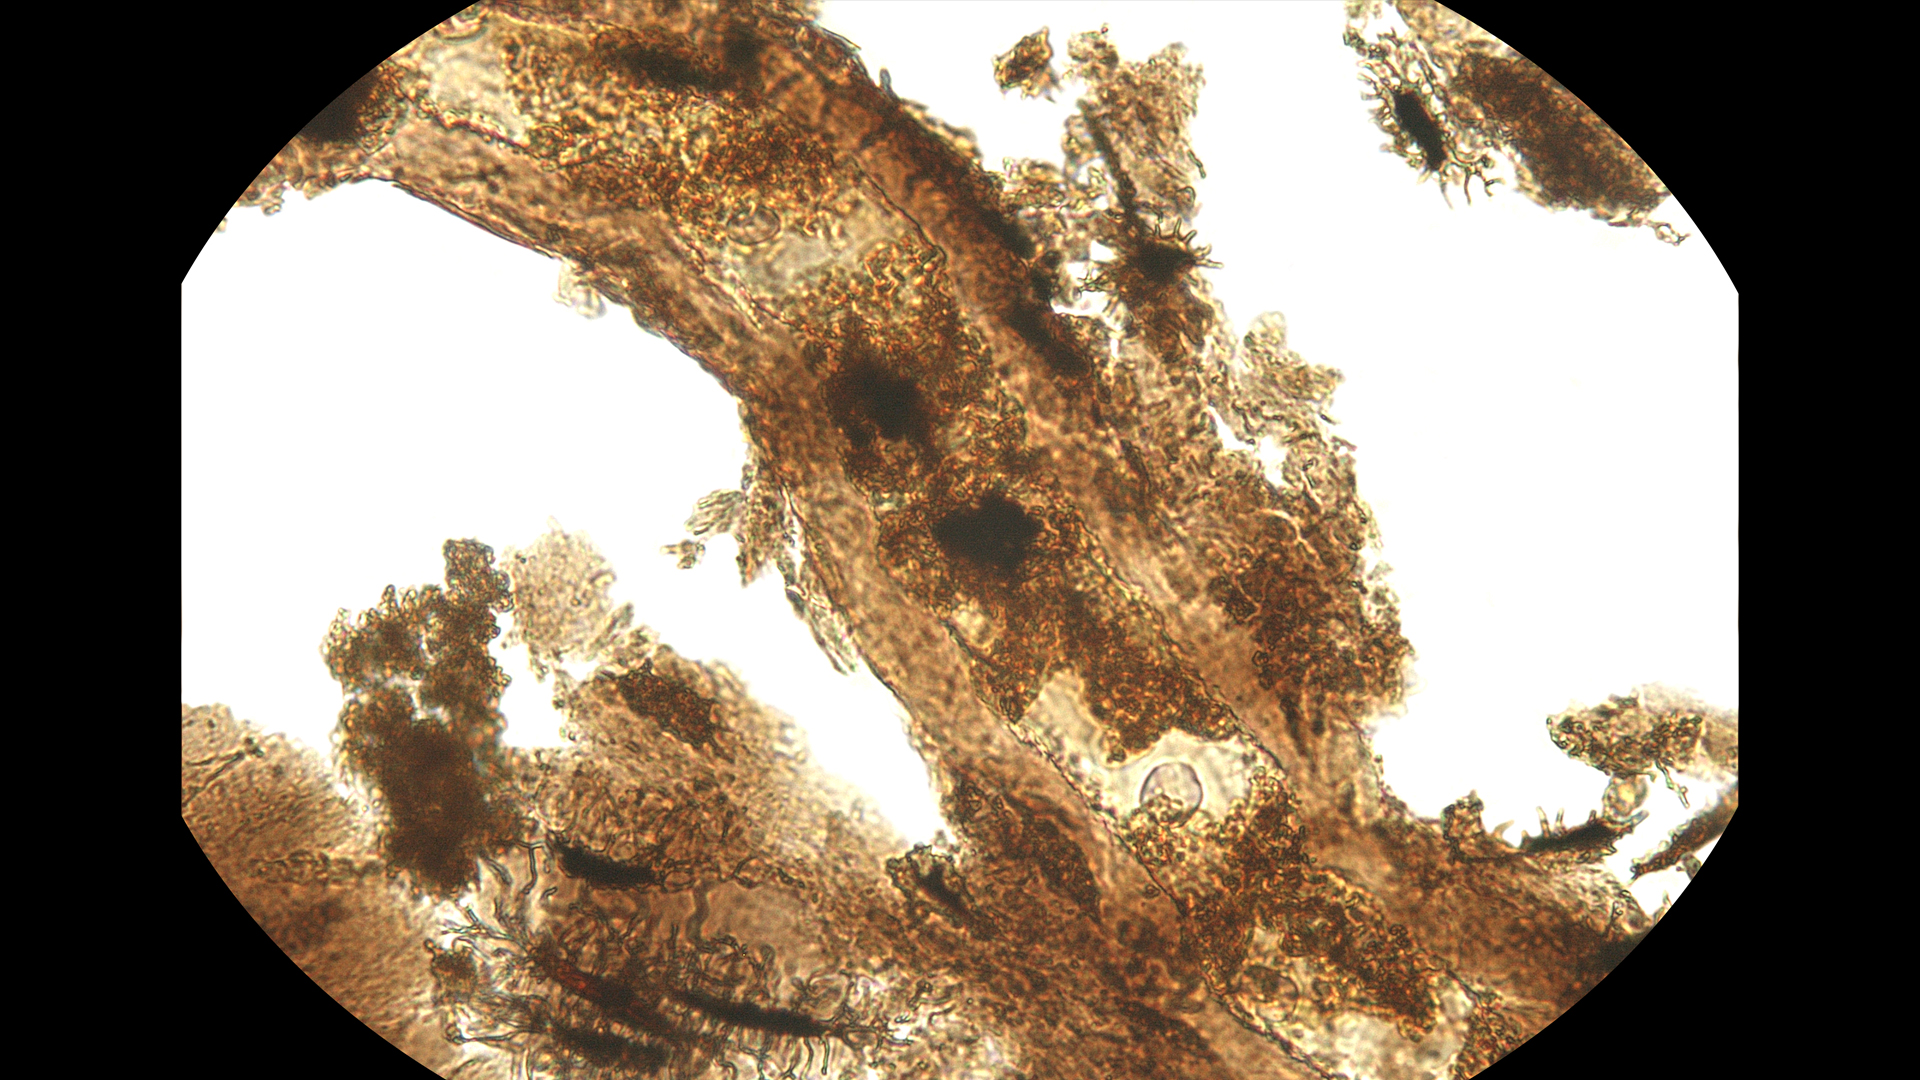 Microscopic view of extracted soft tissues from the bones of one of the dinosaur specimens (Allosaurus) that were investigated for metabolic signals.